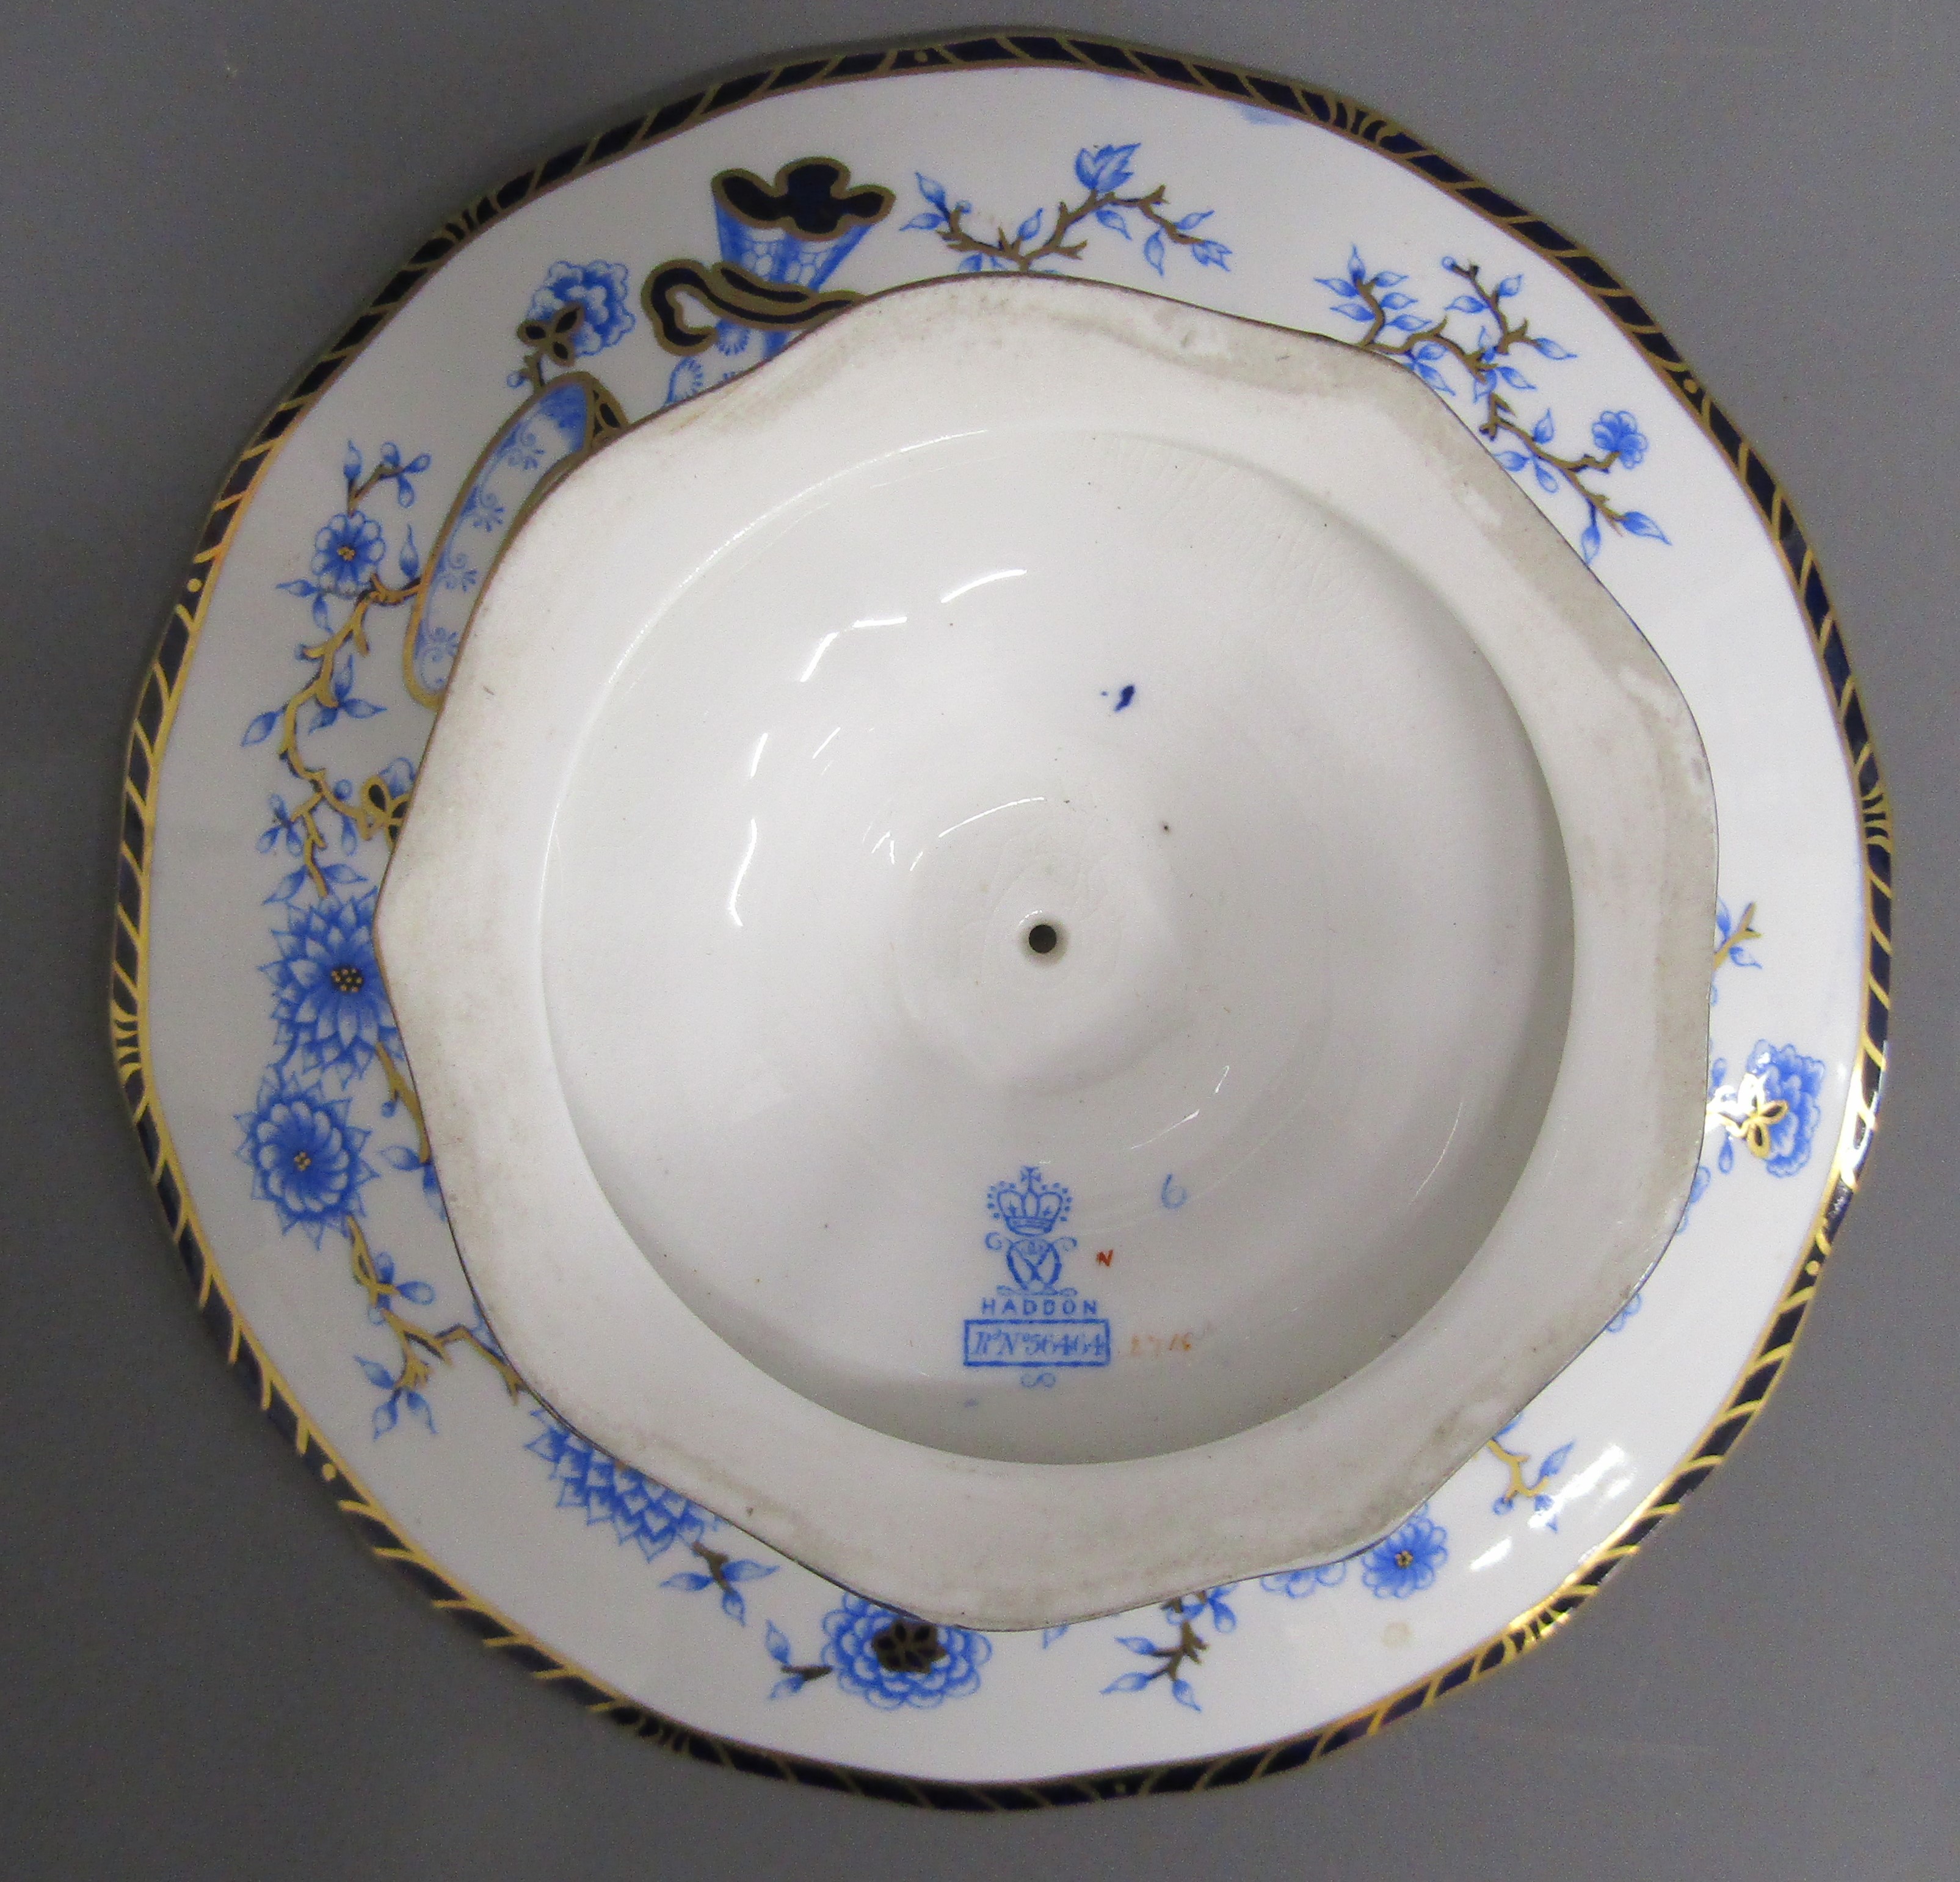 Royal Crown Derby tazza Rd No 56464 pattern No 2715? and 2 George Jones Crescent plates - Image 7 of 8